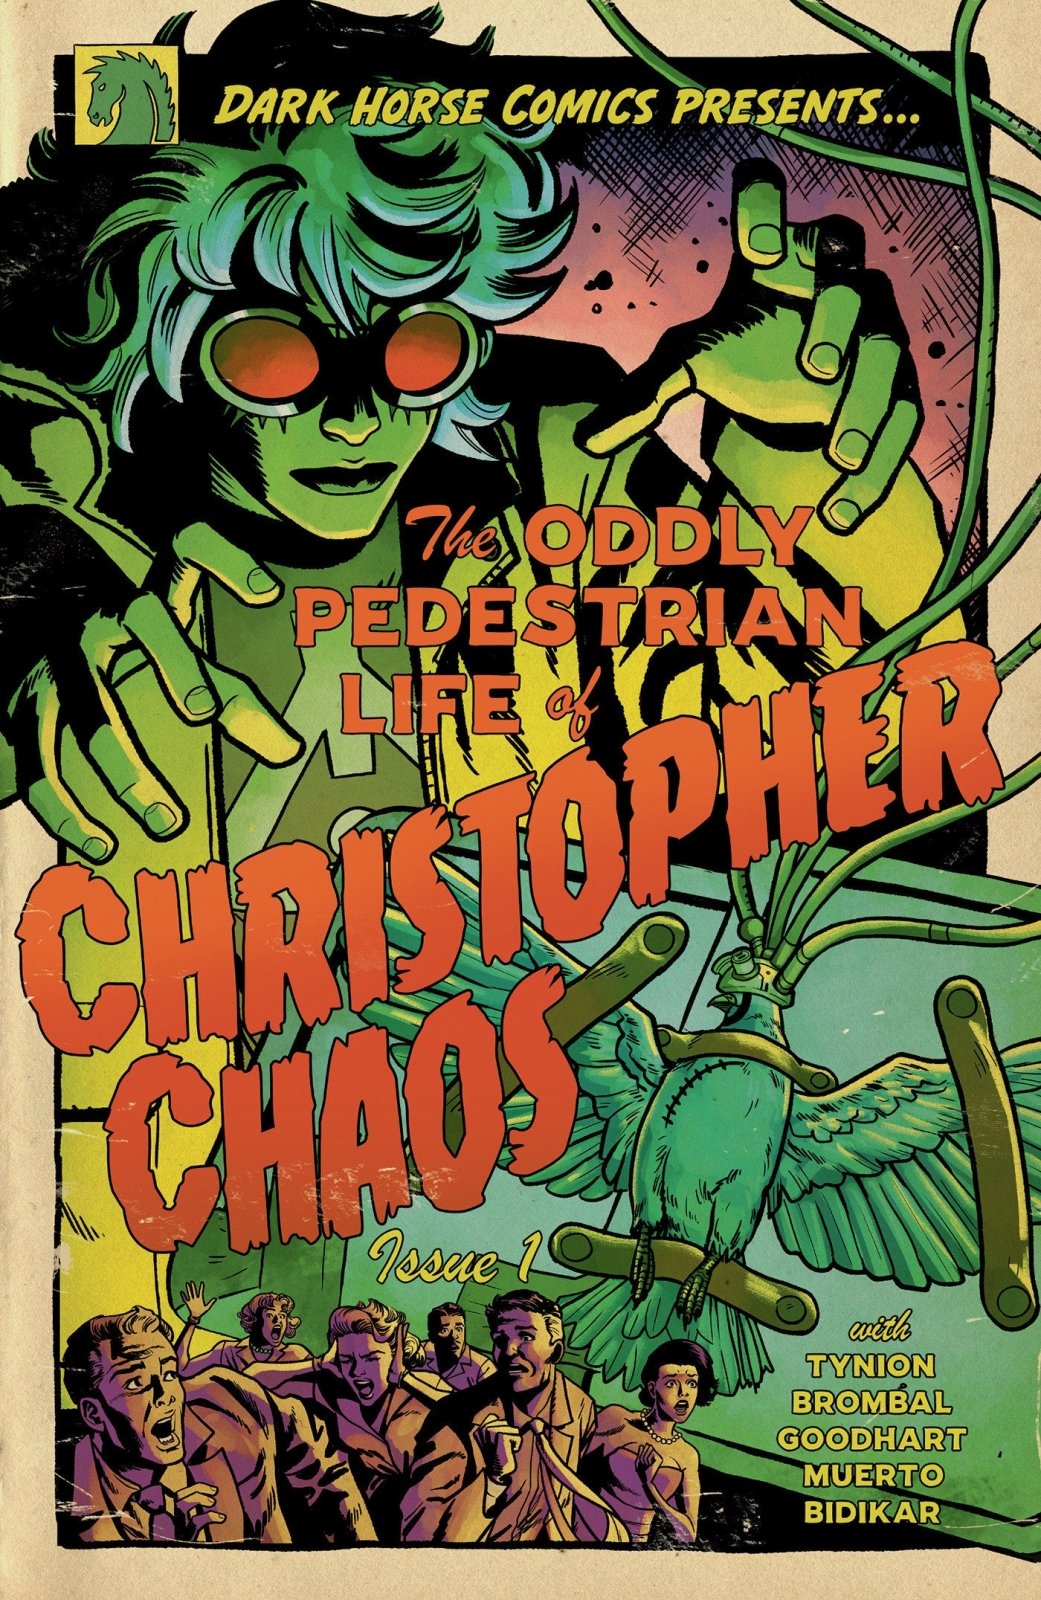 The Oddly Pedestrian Life Of Christopher Chaos #1 (Cover E) (Isaac Goodhart) - The Fourth Place